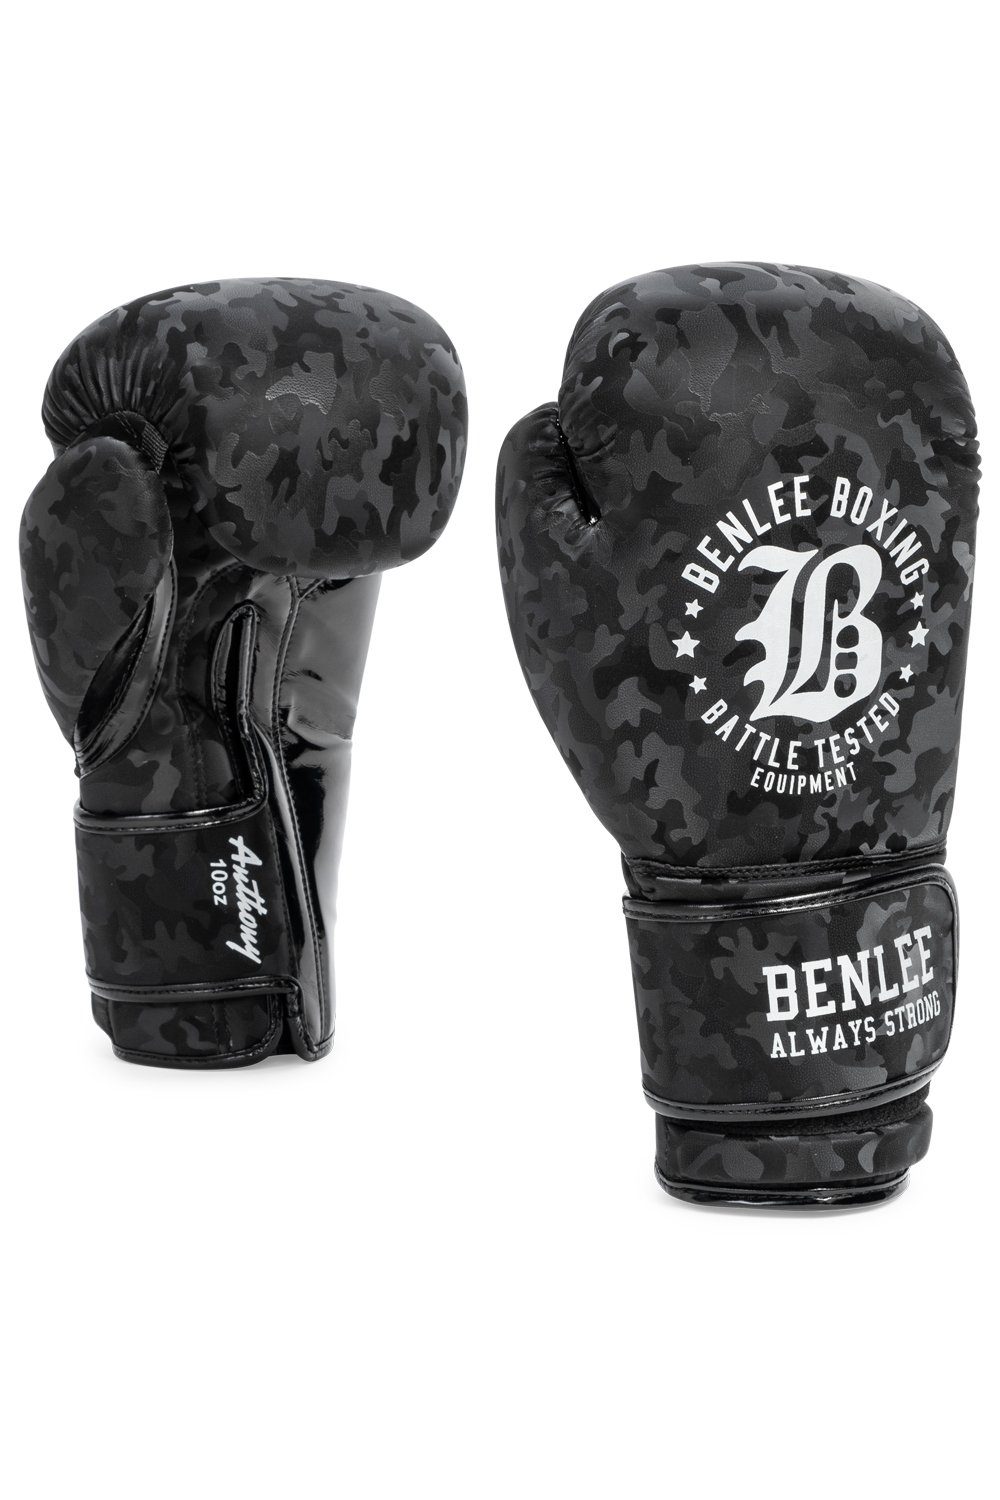 Boxhandschuhe Marciano Rocky ANTHONY Benlee